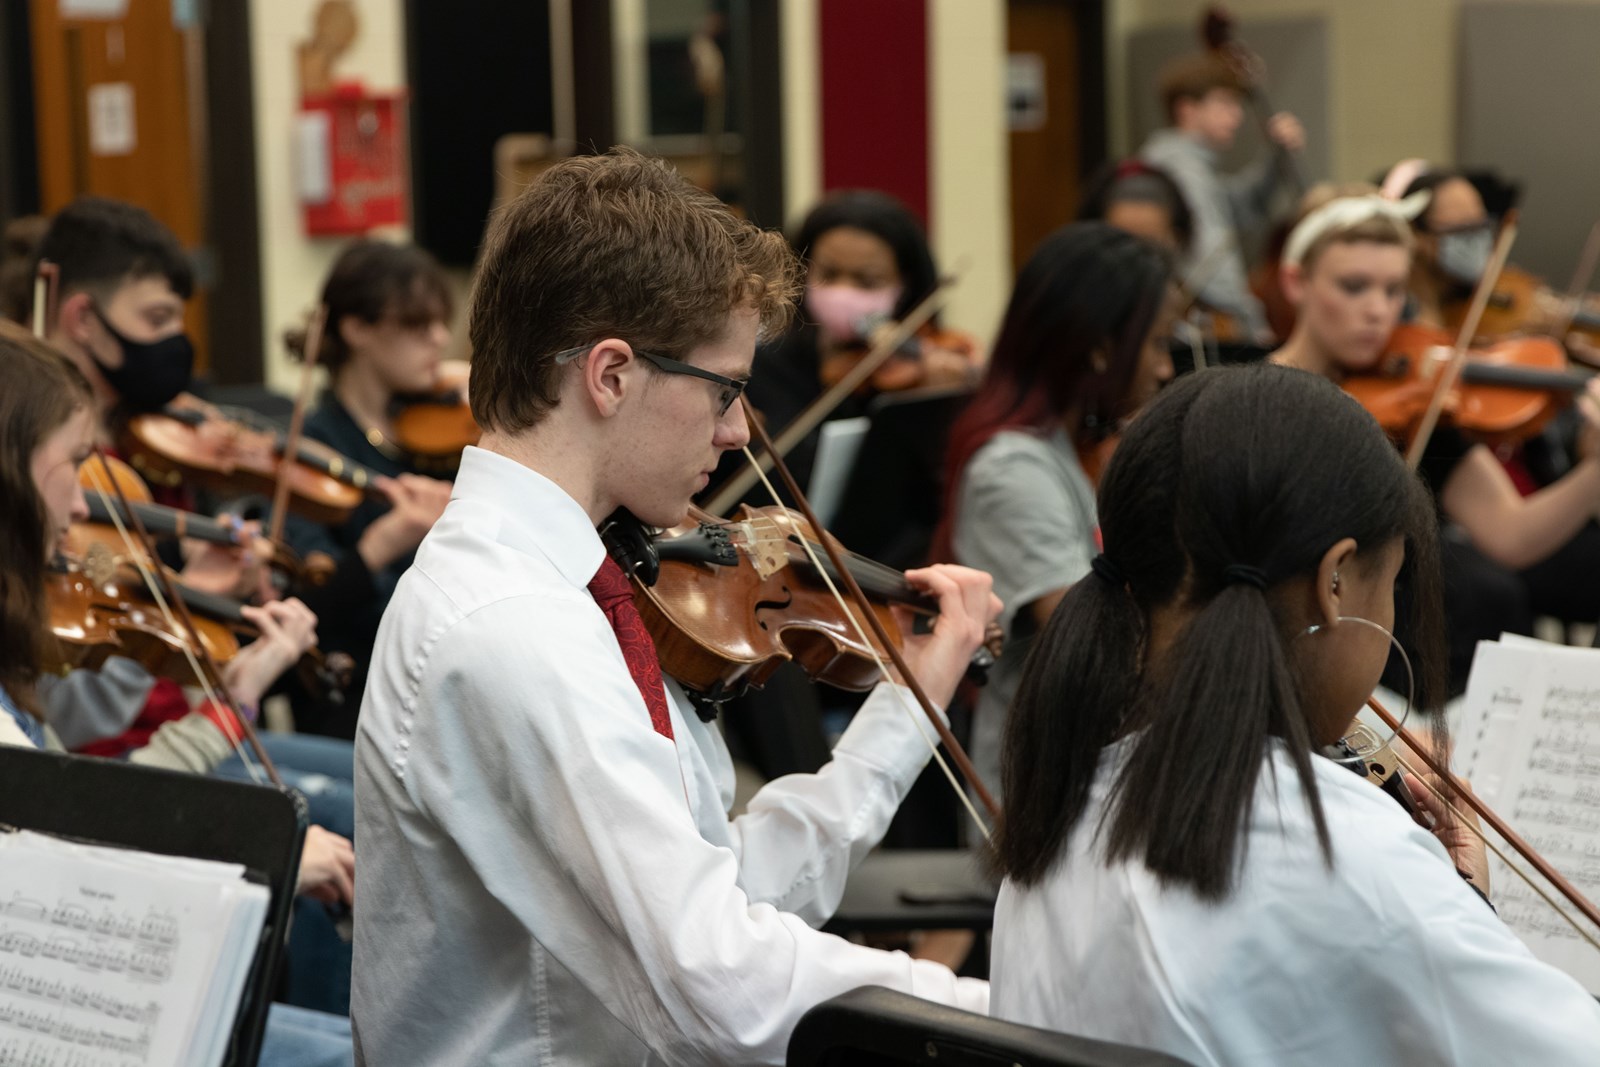 Allatoona%20High%20School%20students%20participate%20in%20James%20Palmer's%20orchestra%20class-46.jpg